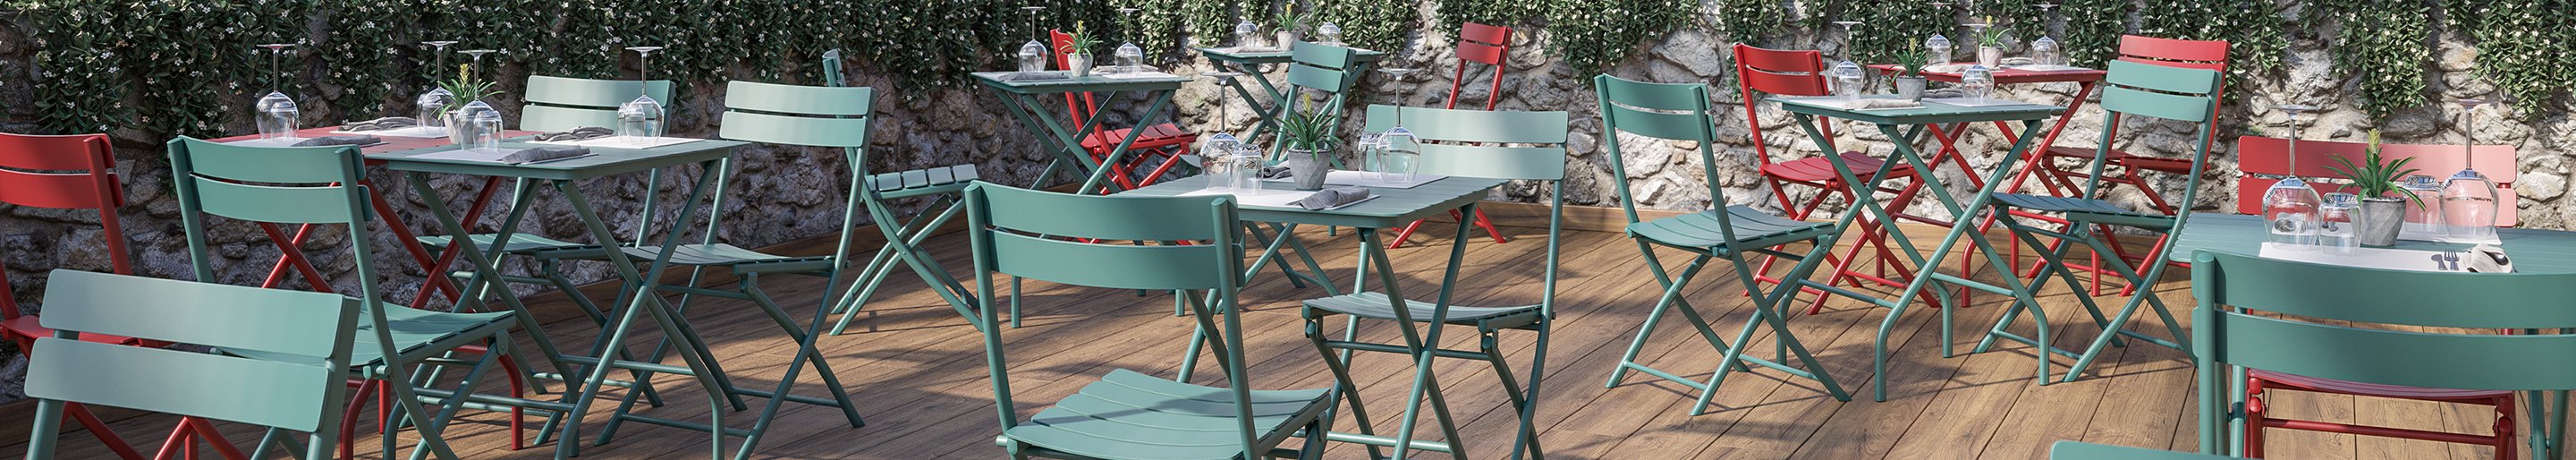 Outdoor furniture for your restaurant or hotel